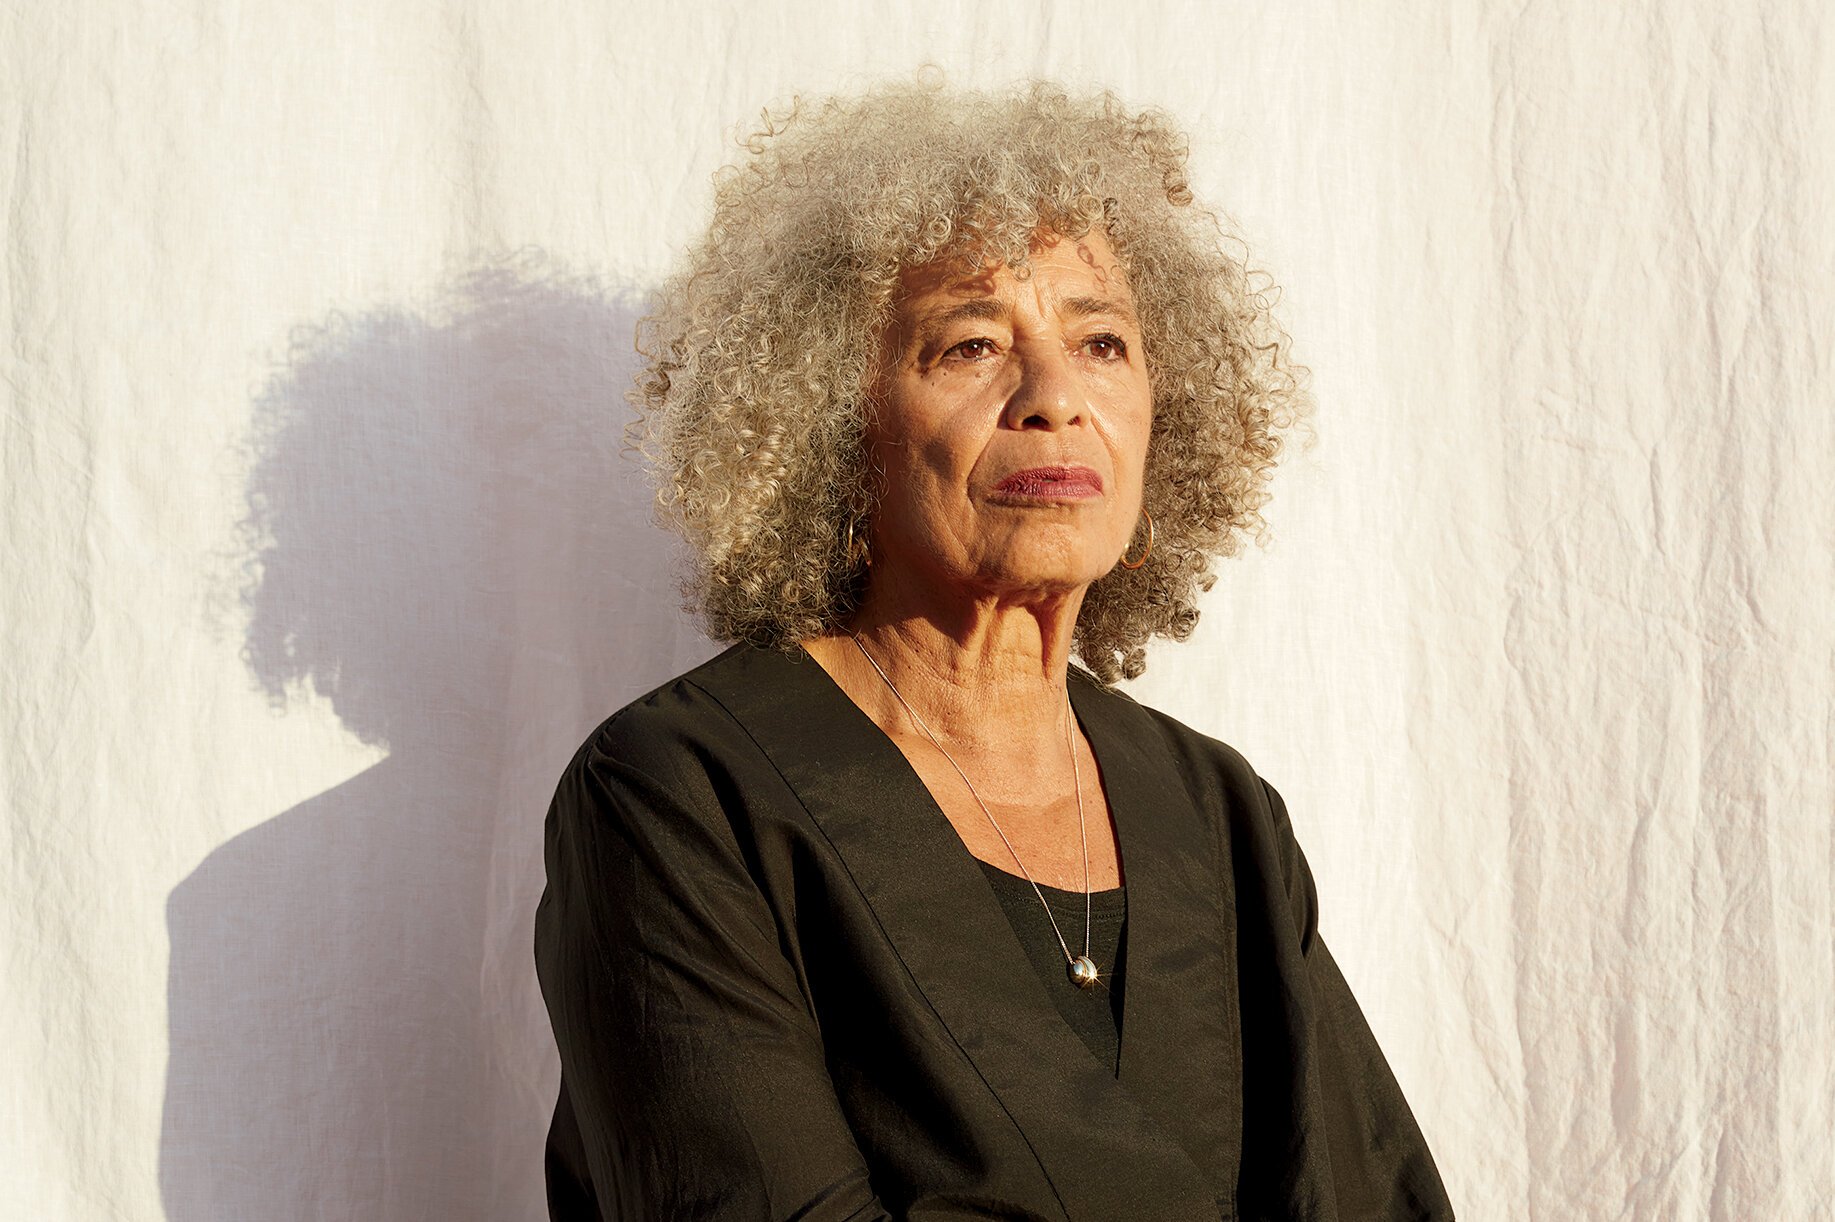 Angela Davis is a visionary: sees the big picture and gives us that vision. She fights for truth even over personal safety, long-term goals even over short-term comfort.